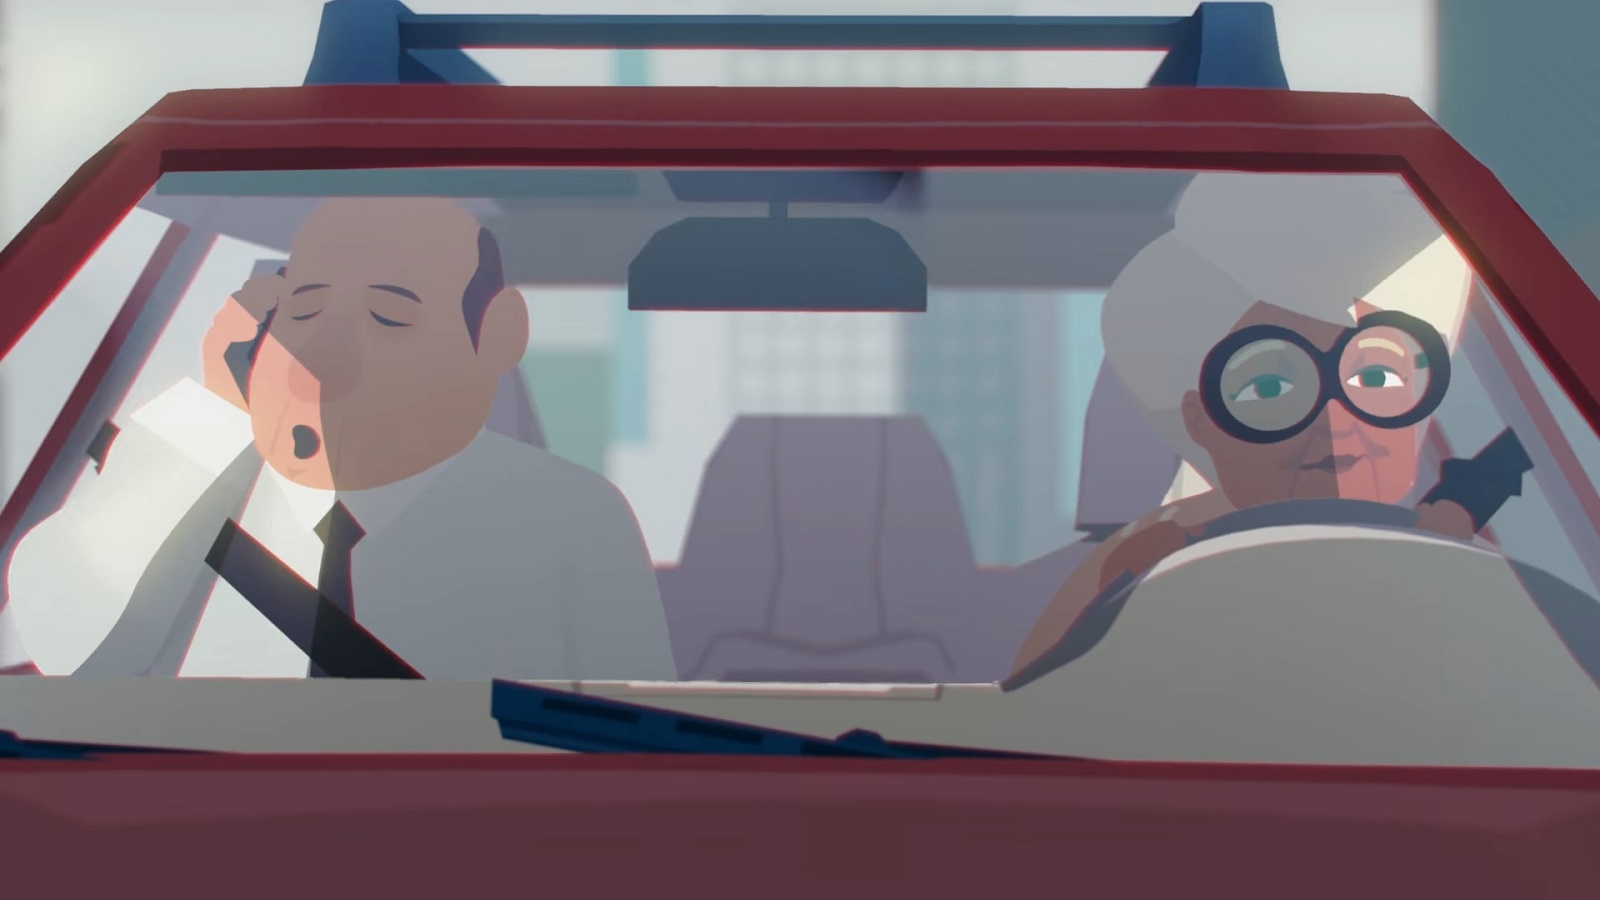 TBT: Lyft Tells Sweet Story of Old Widow in Animated Video